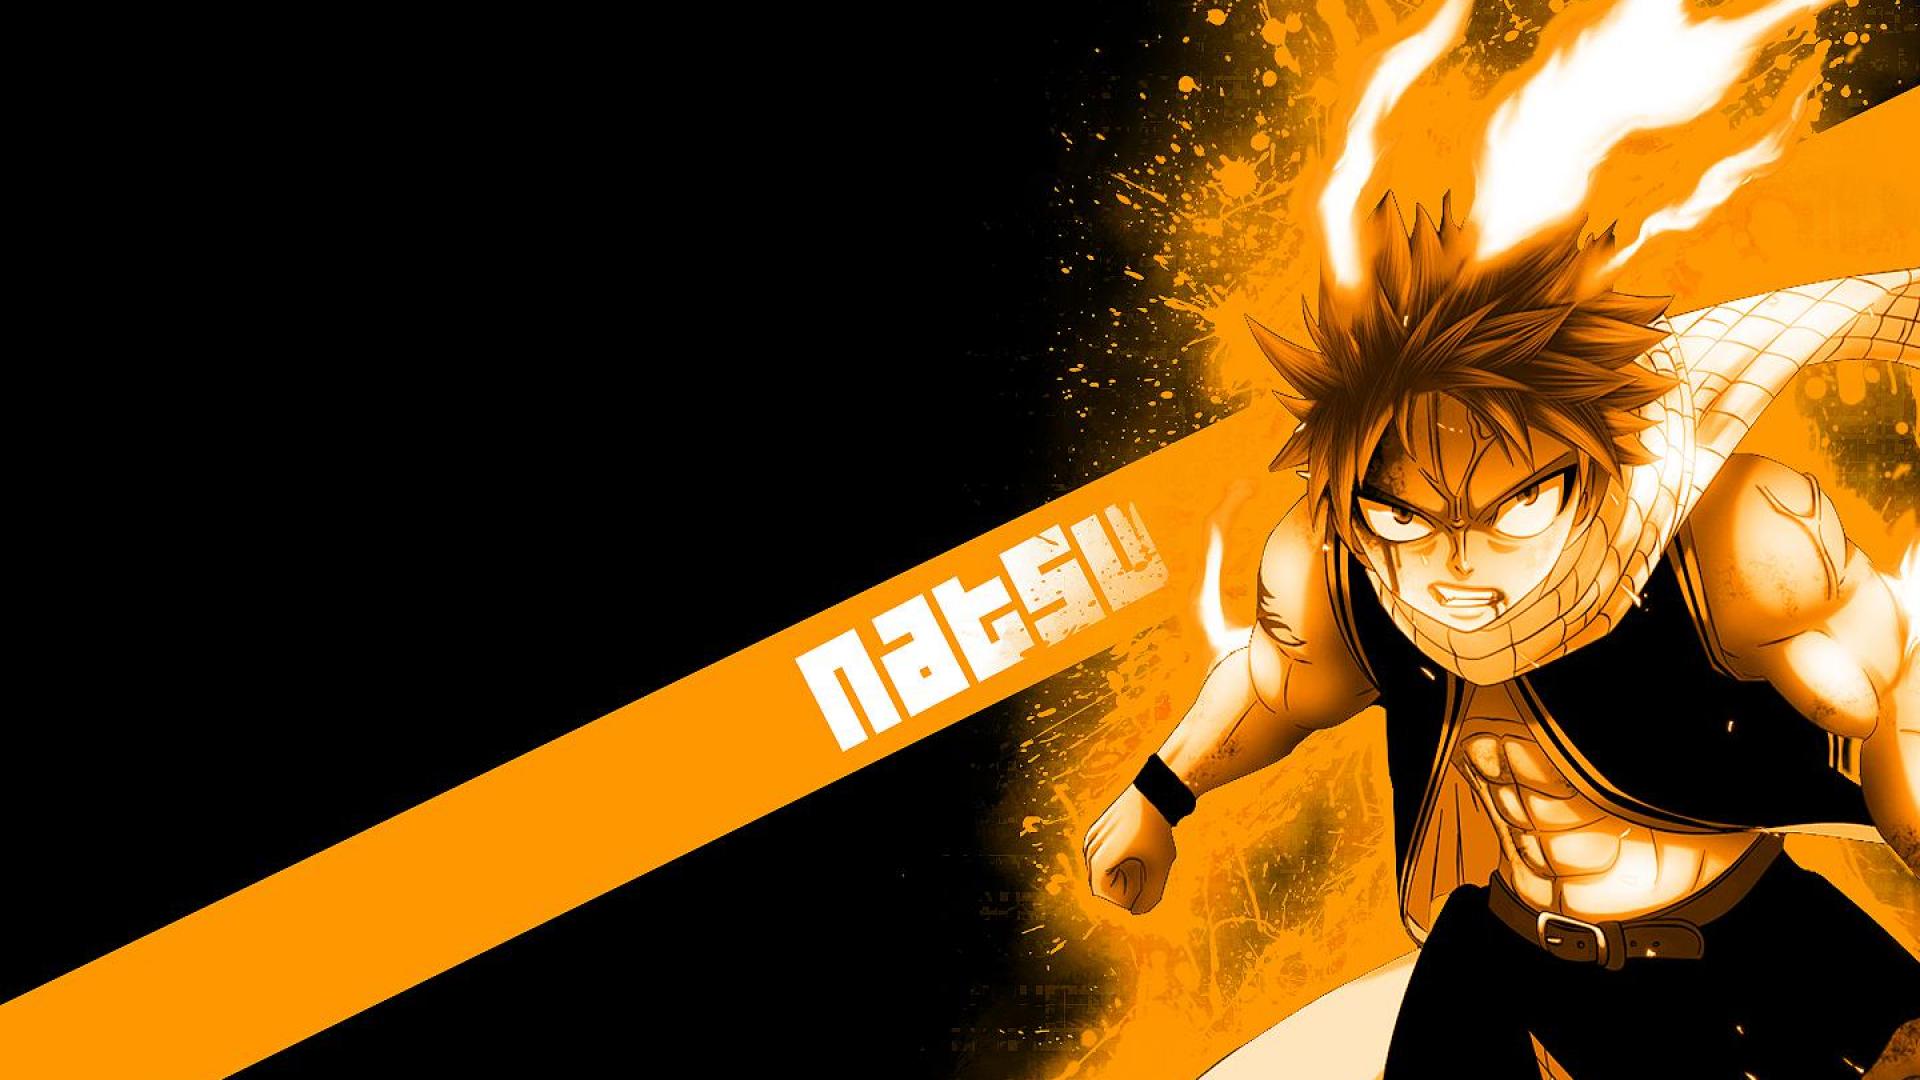 Fairy tail natsu - (#134519) - High Quality and Resolution ...